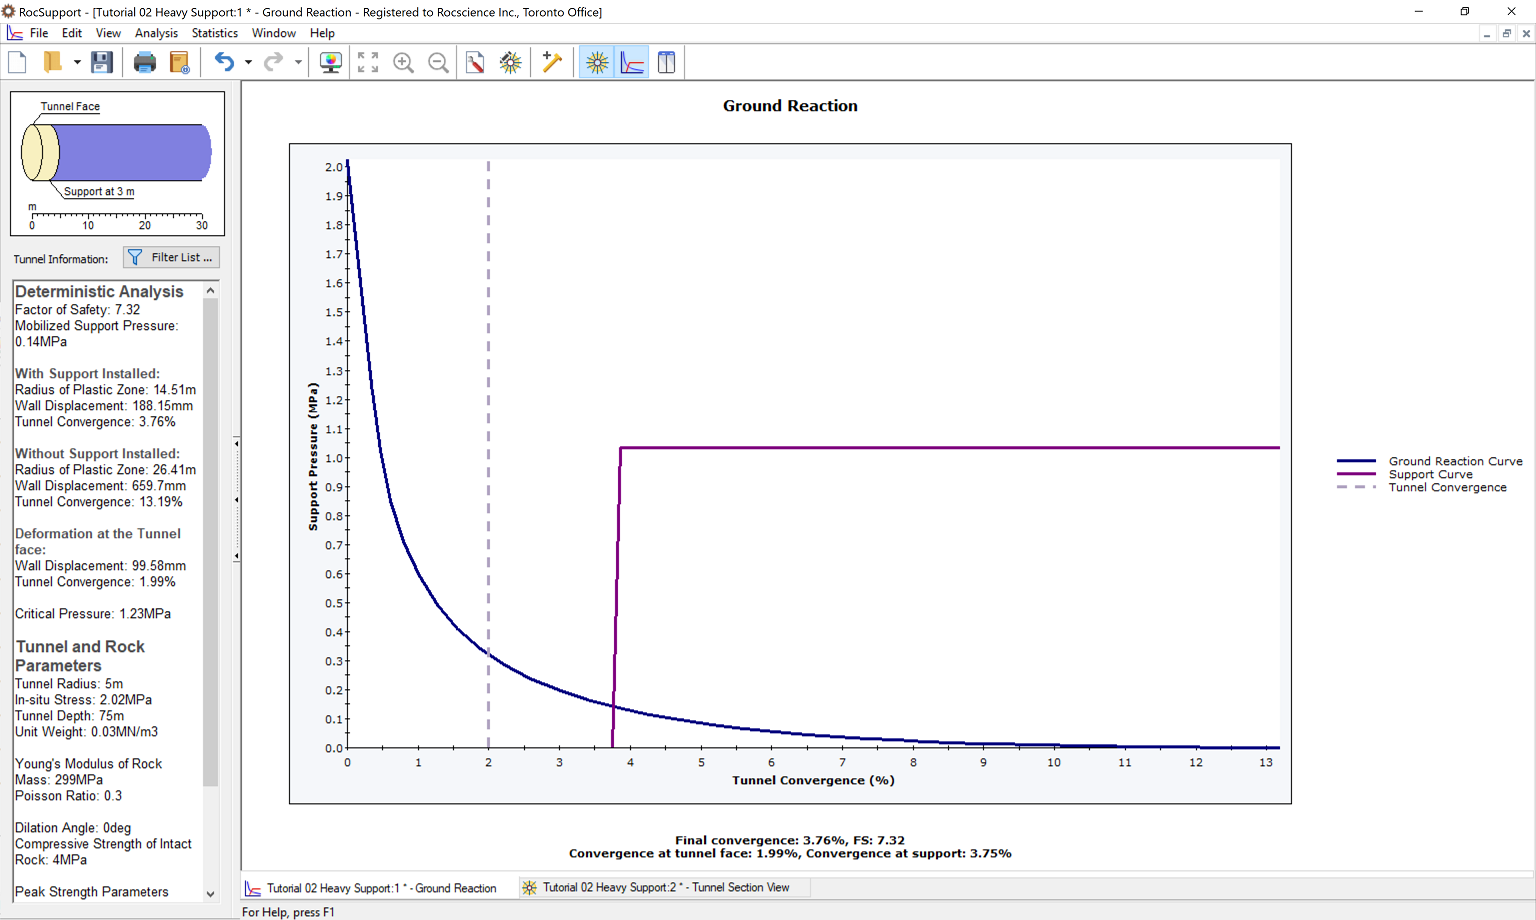 Ground reaction curve view final results